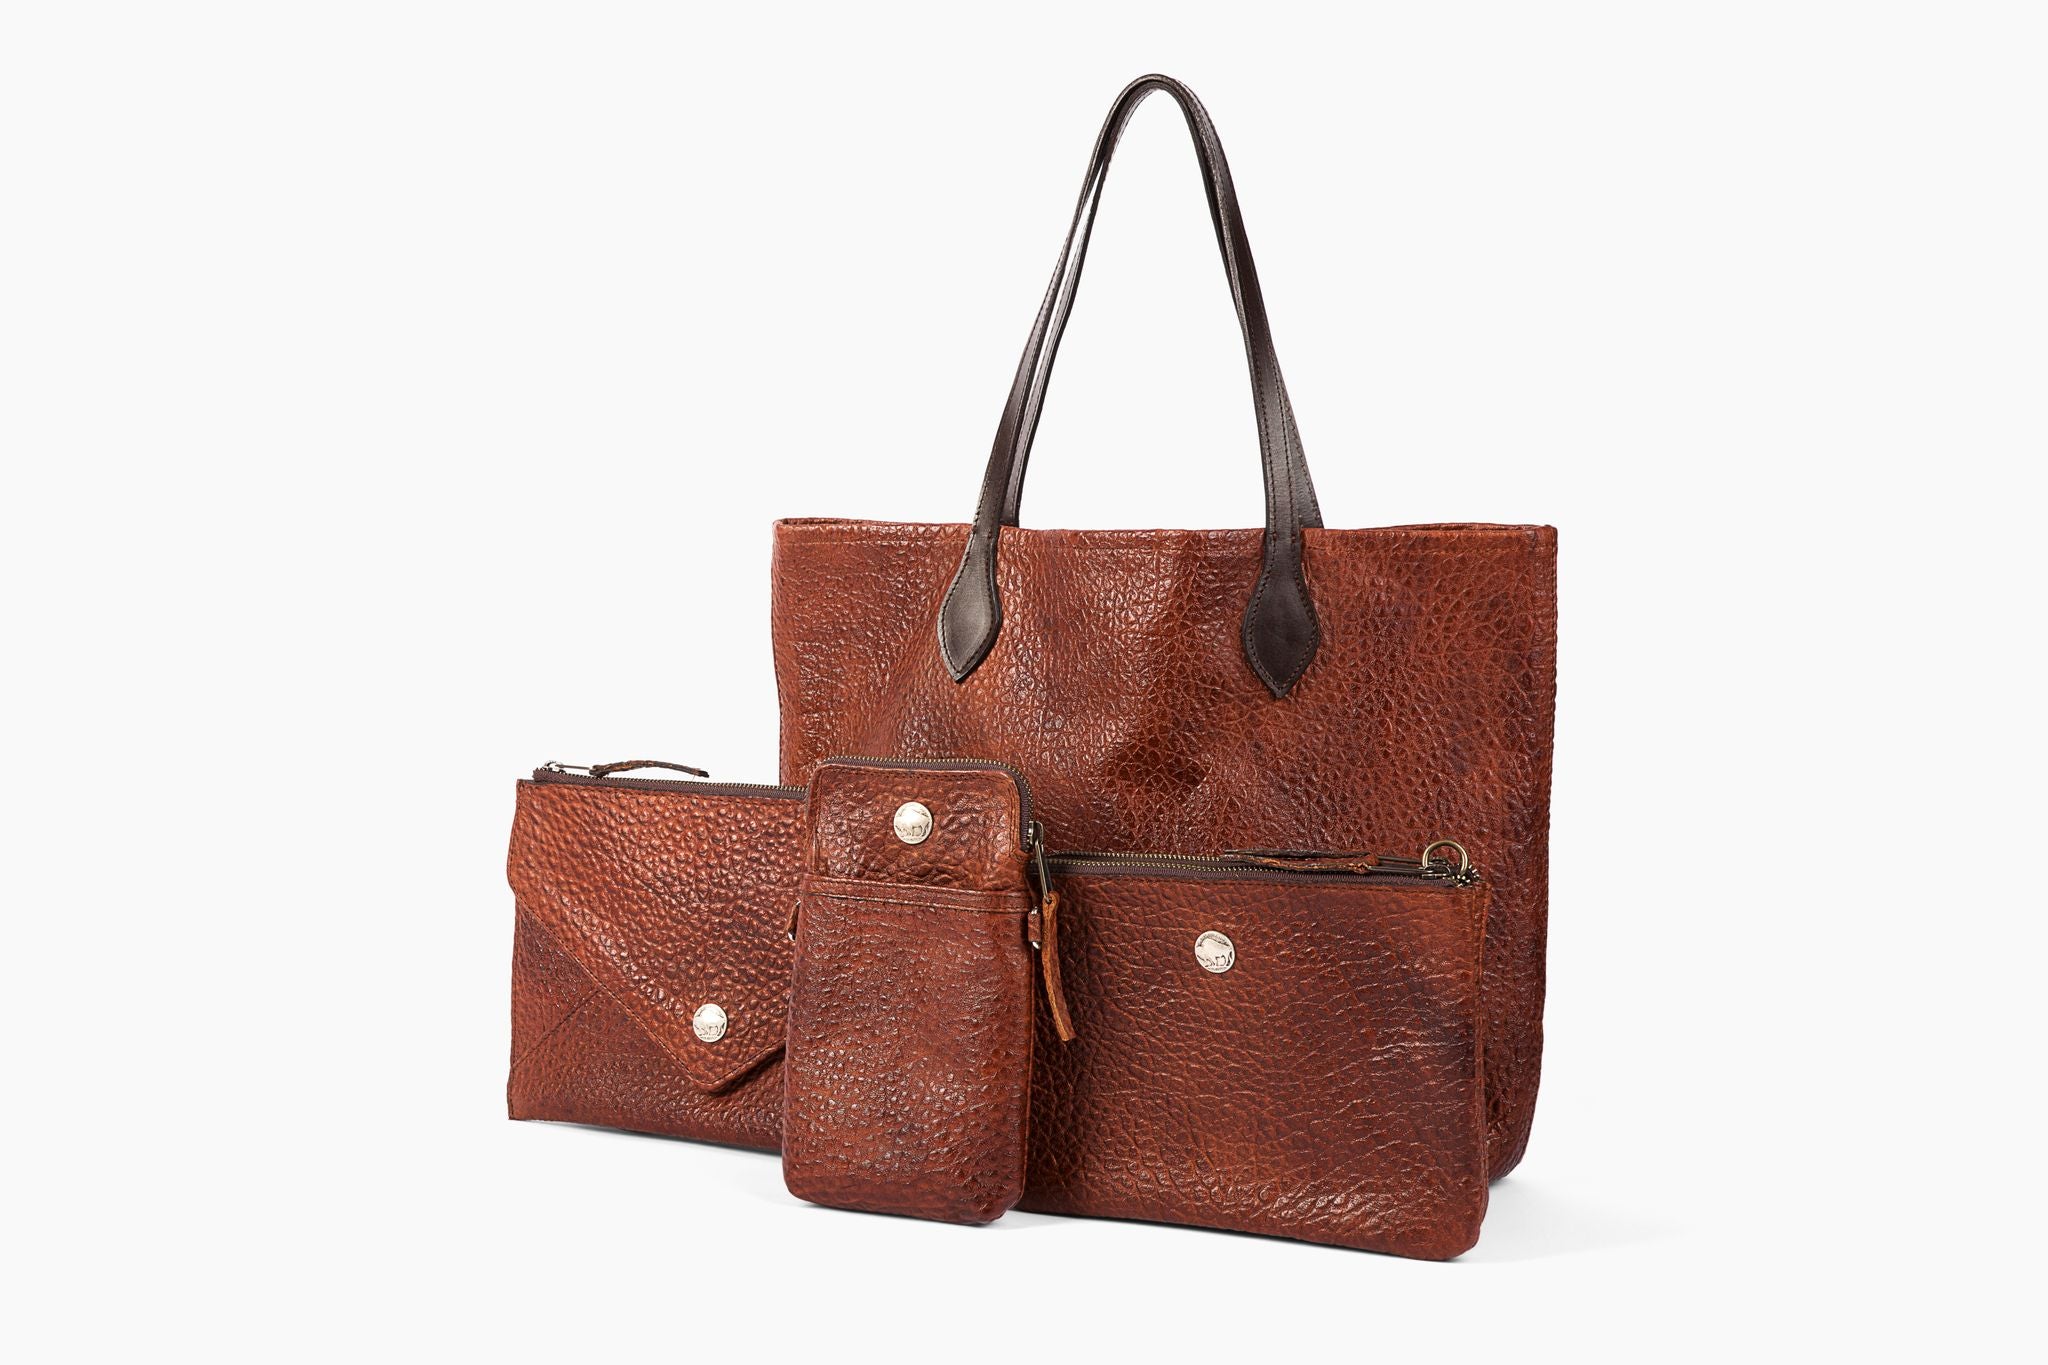 American Bison Bags in Cinnamon color tone, "Bubble"  texture - #3000 Large Tote, front row L to R #3766 Crossbody Clutch, #3760 Ultimate Travel Crossbody, #3745 Dual Compartment Crossbody